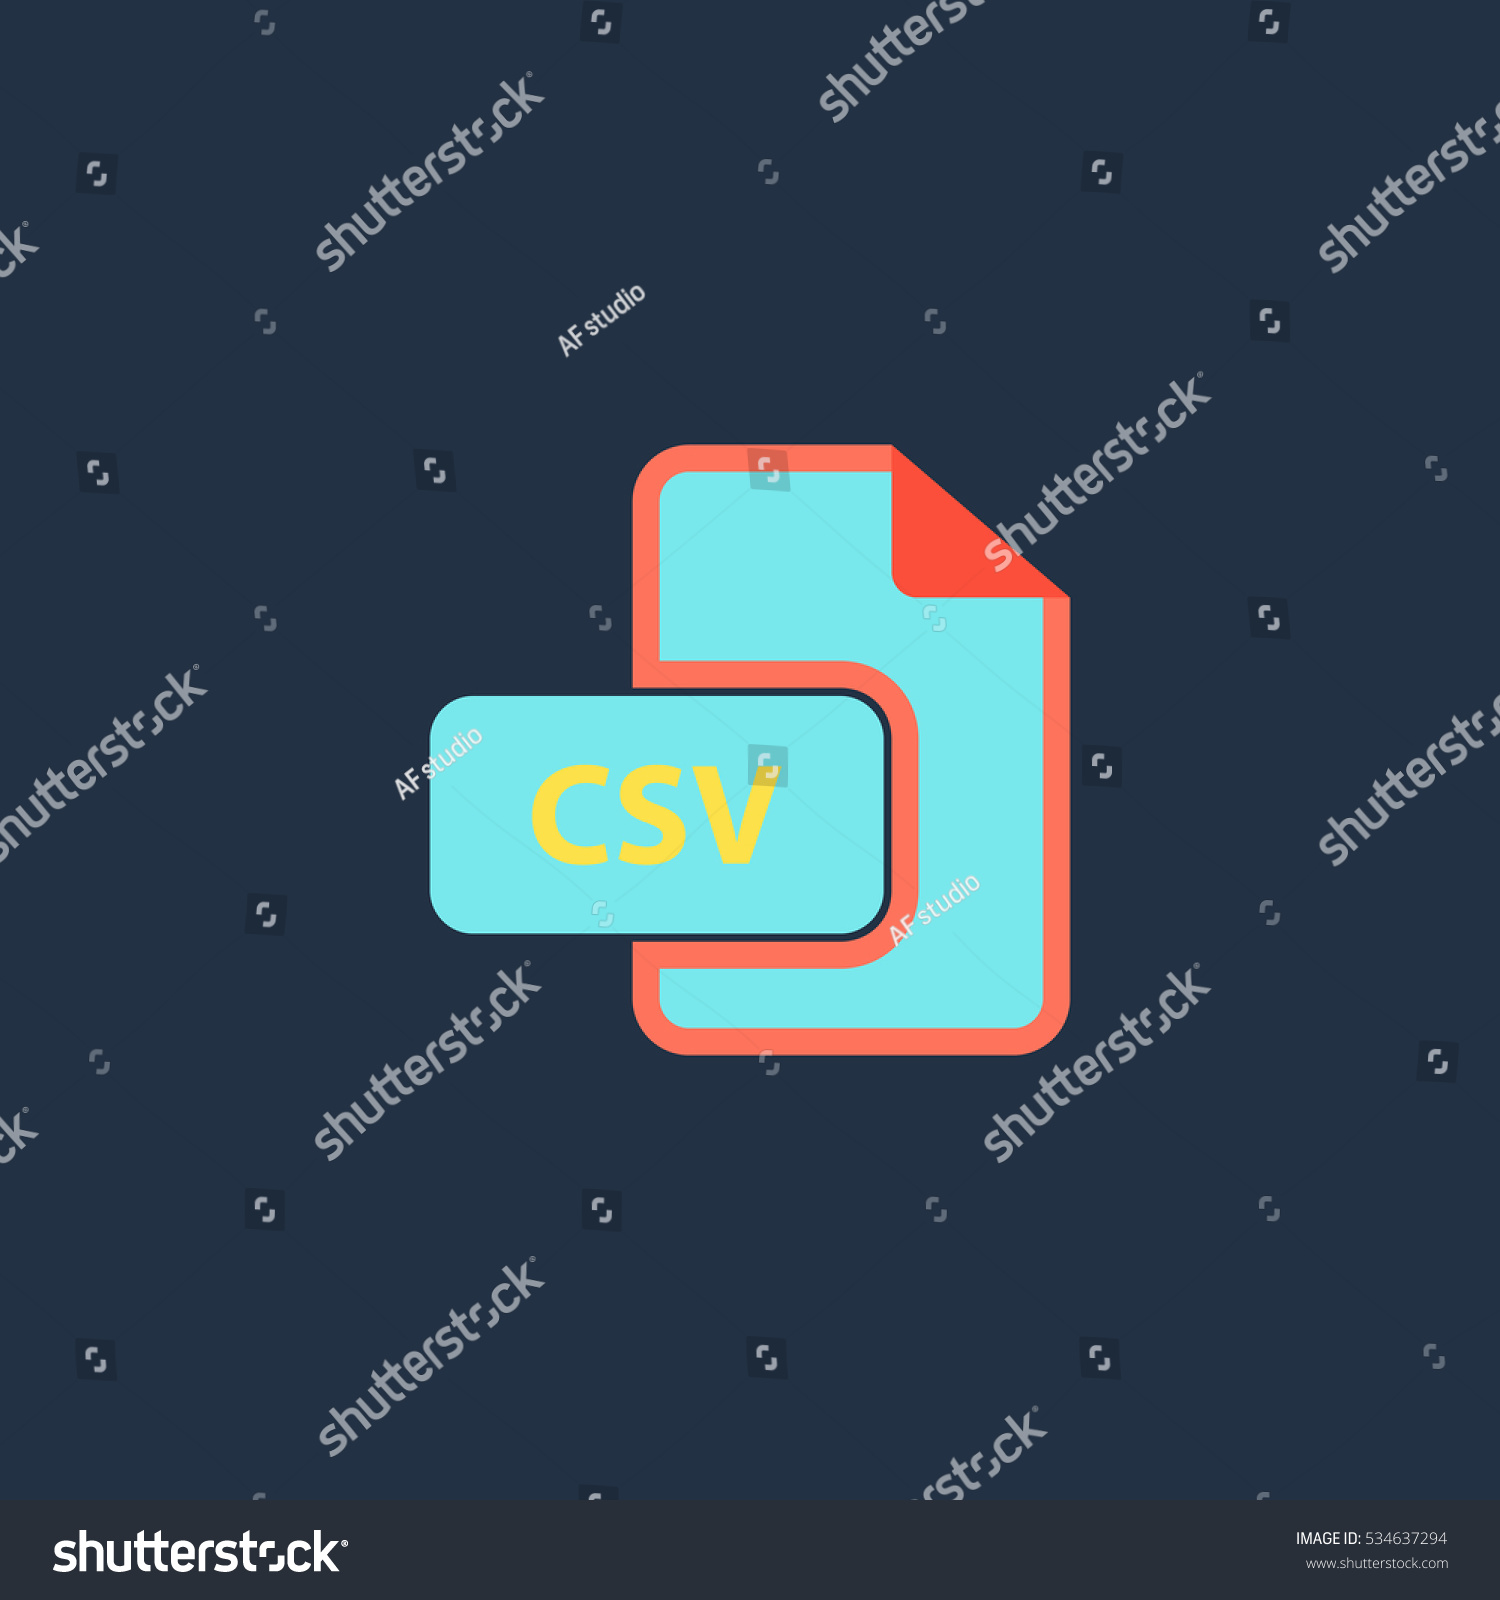 Csv Extension Text File Type Simple Vector Royalty Free Stock Vector 534637294 1530